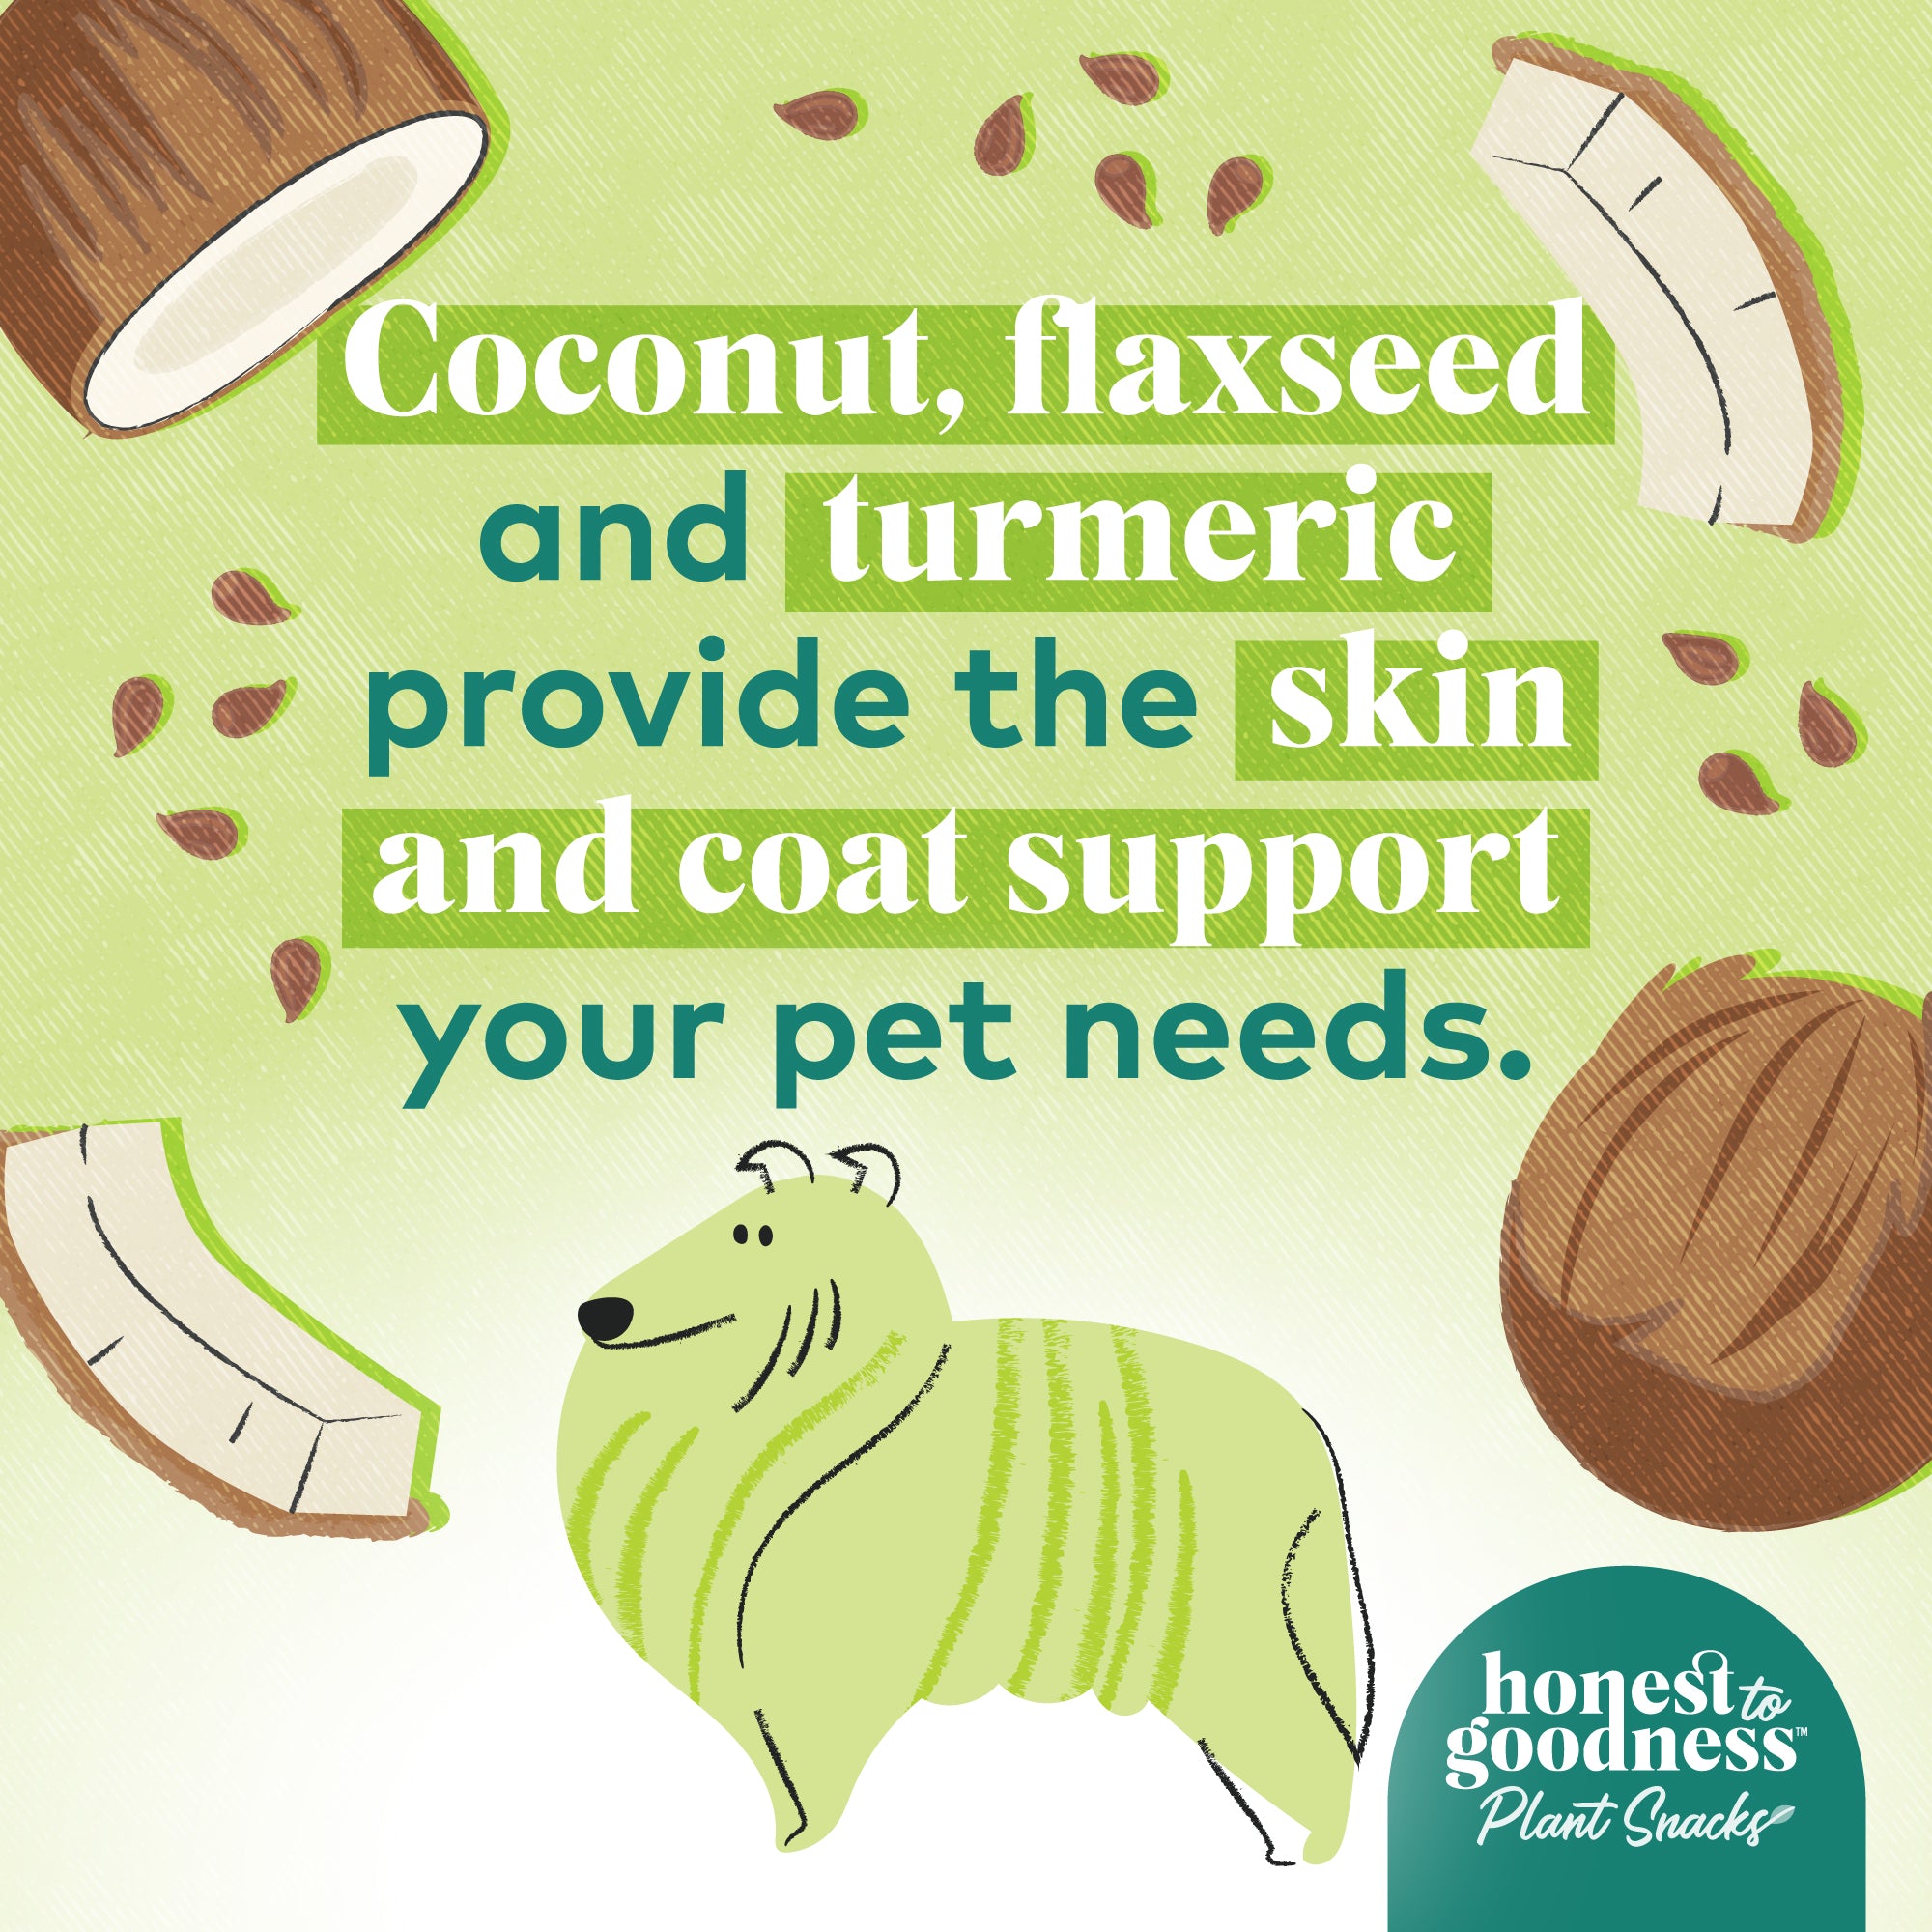 Coconut, flaxseed and turmeric provide the skin and coat support your pet needs.  Honest to Goodness plant snacks.